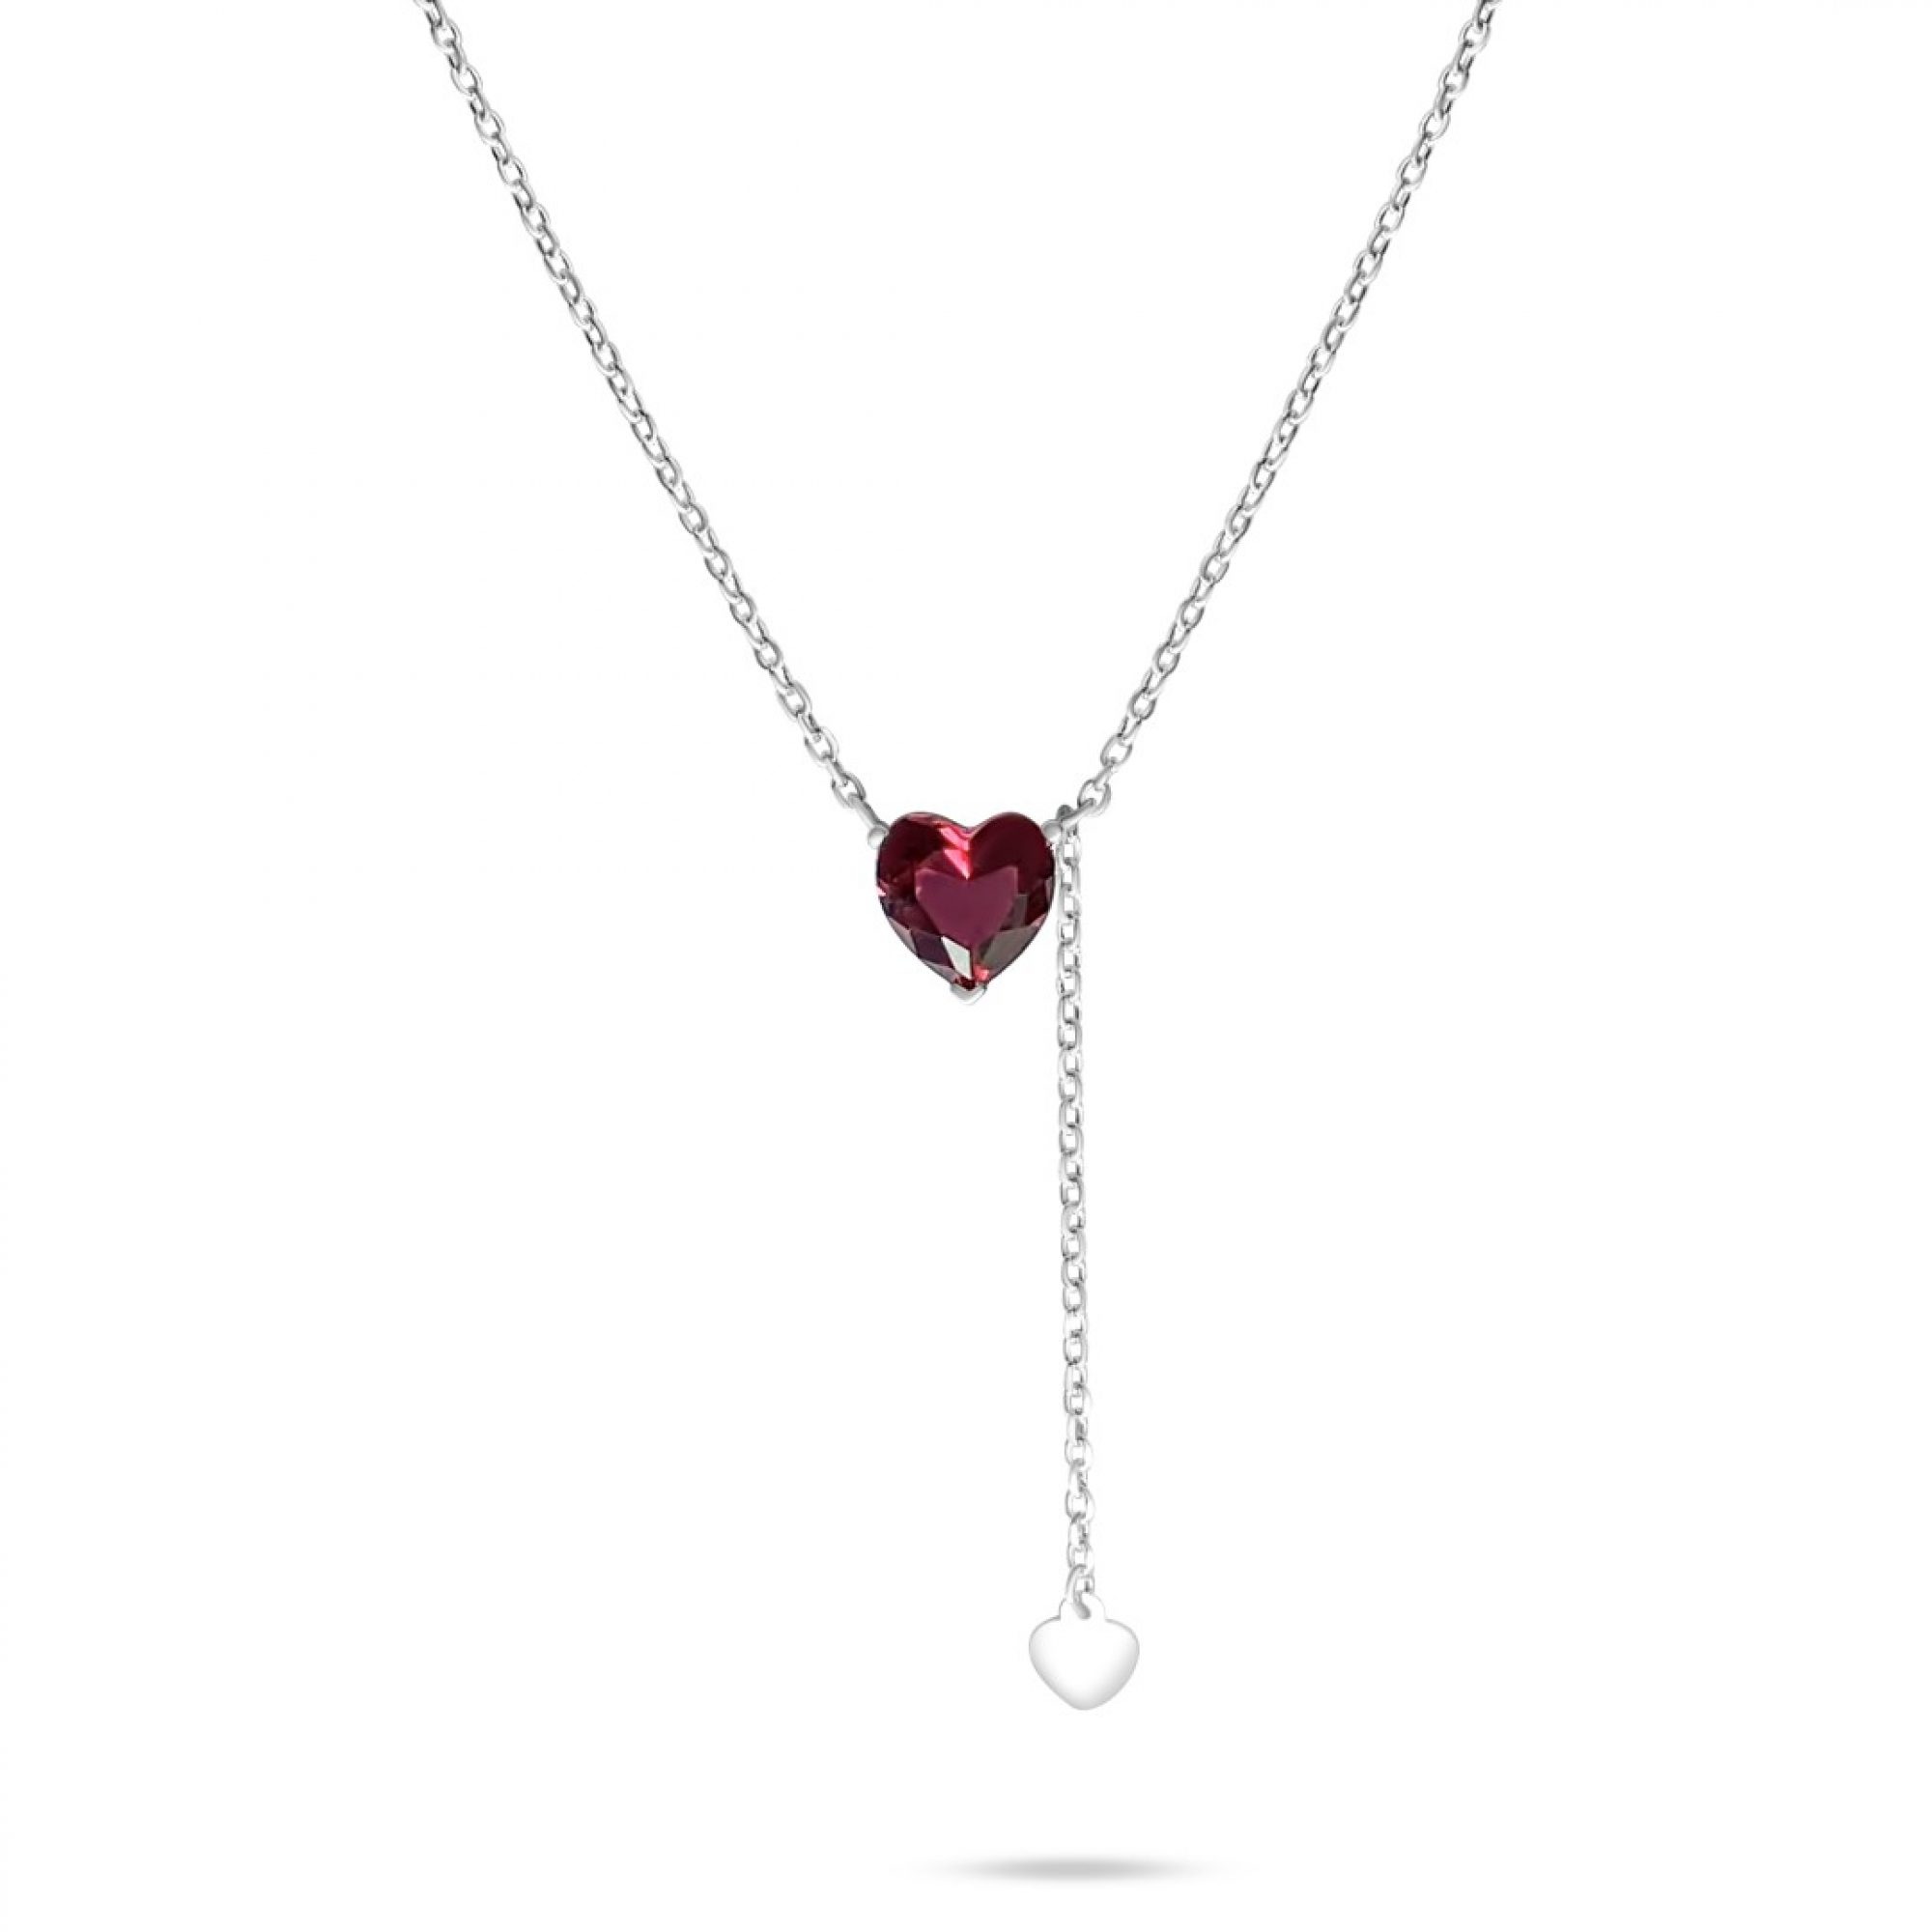 Heart necklace with ruby stone